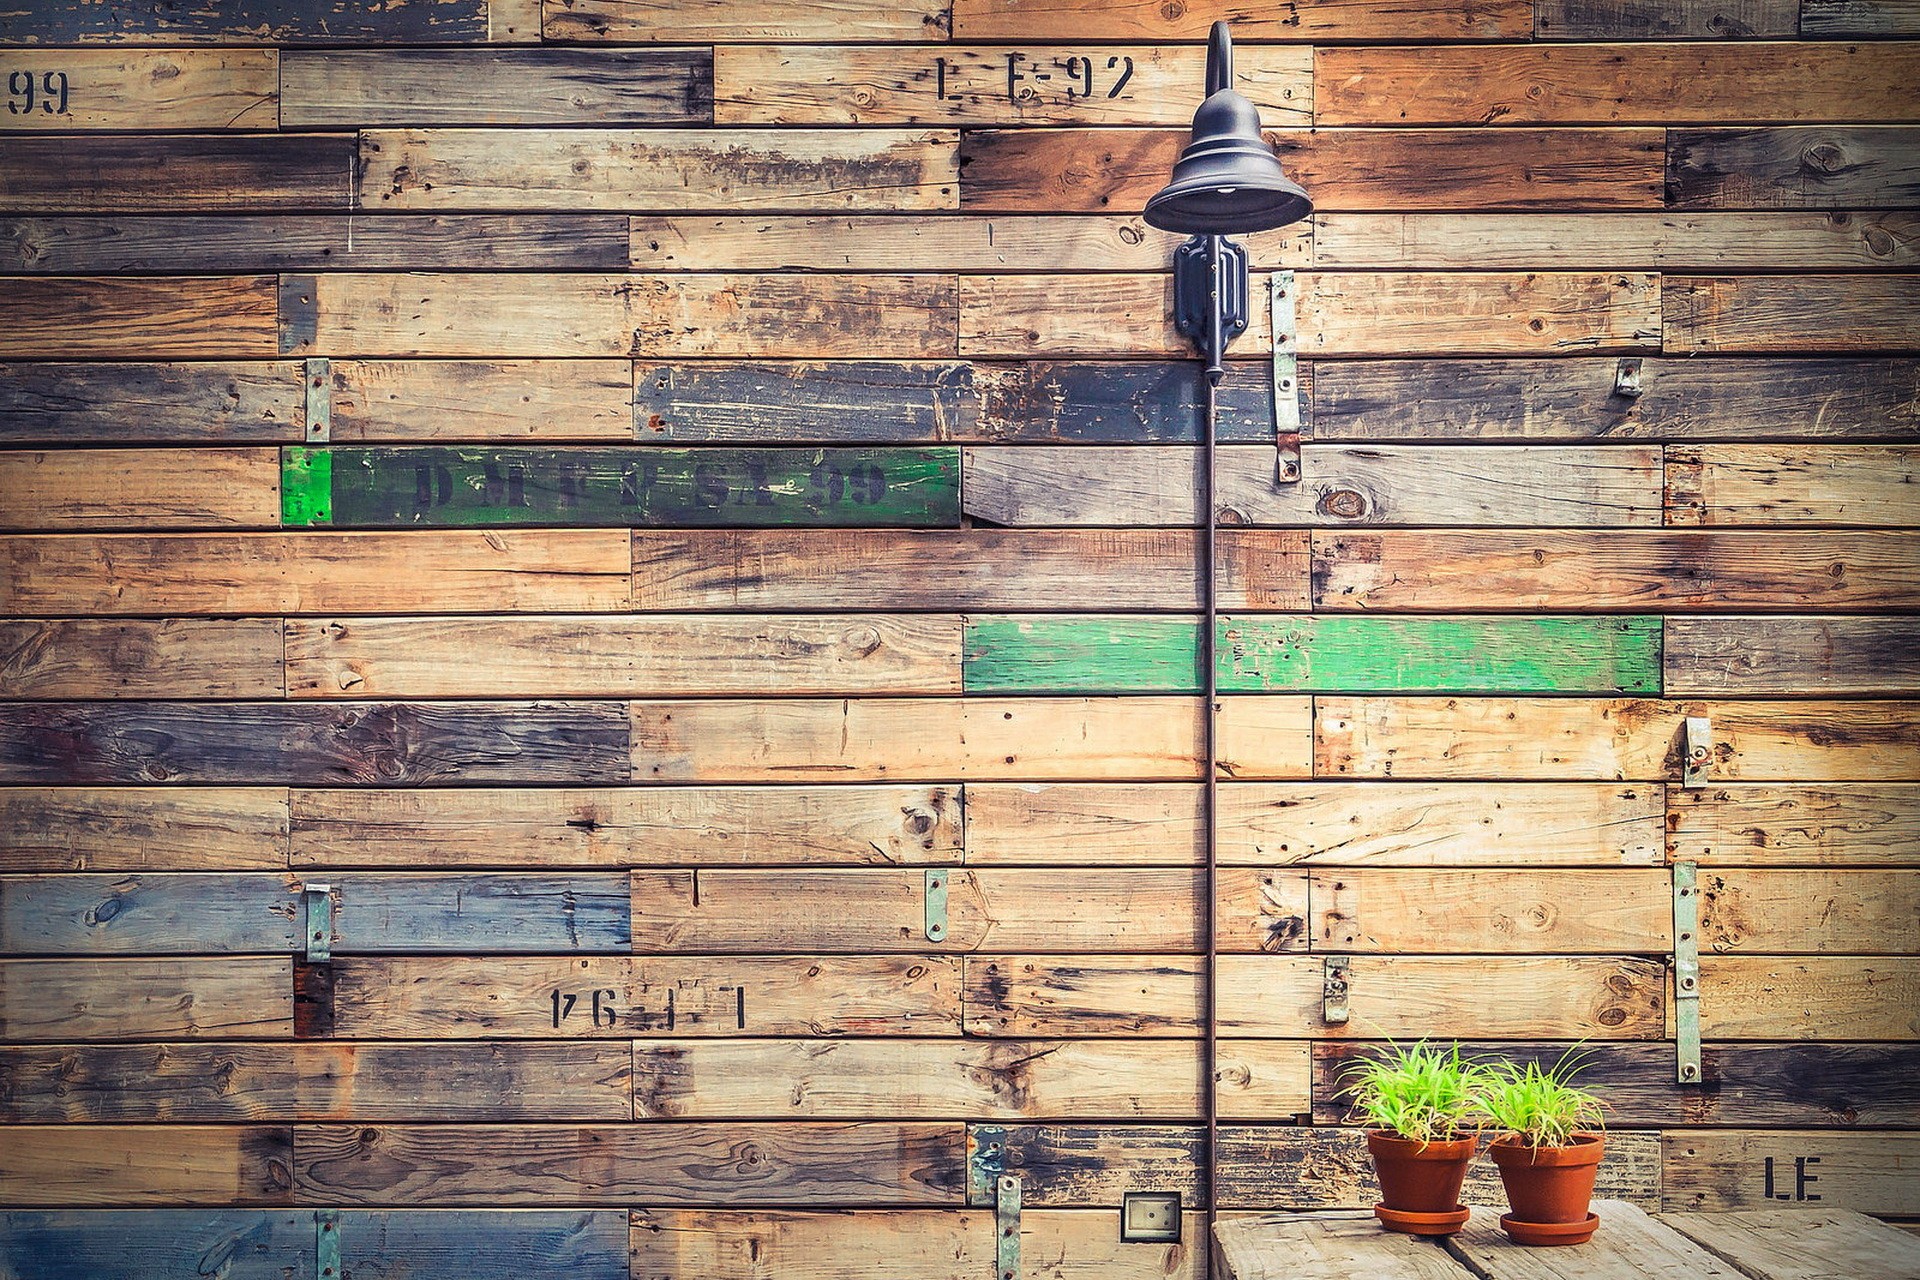 General 1920x1280 wood plants texture numbers wooden surface flowerpot